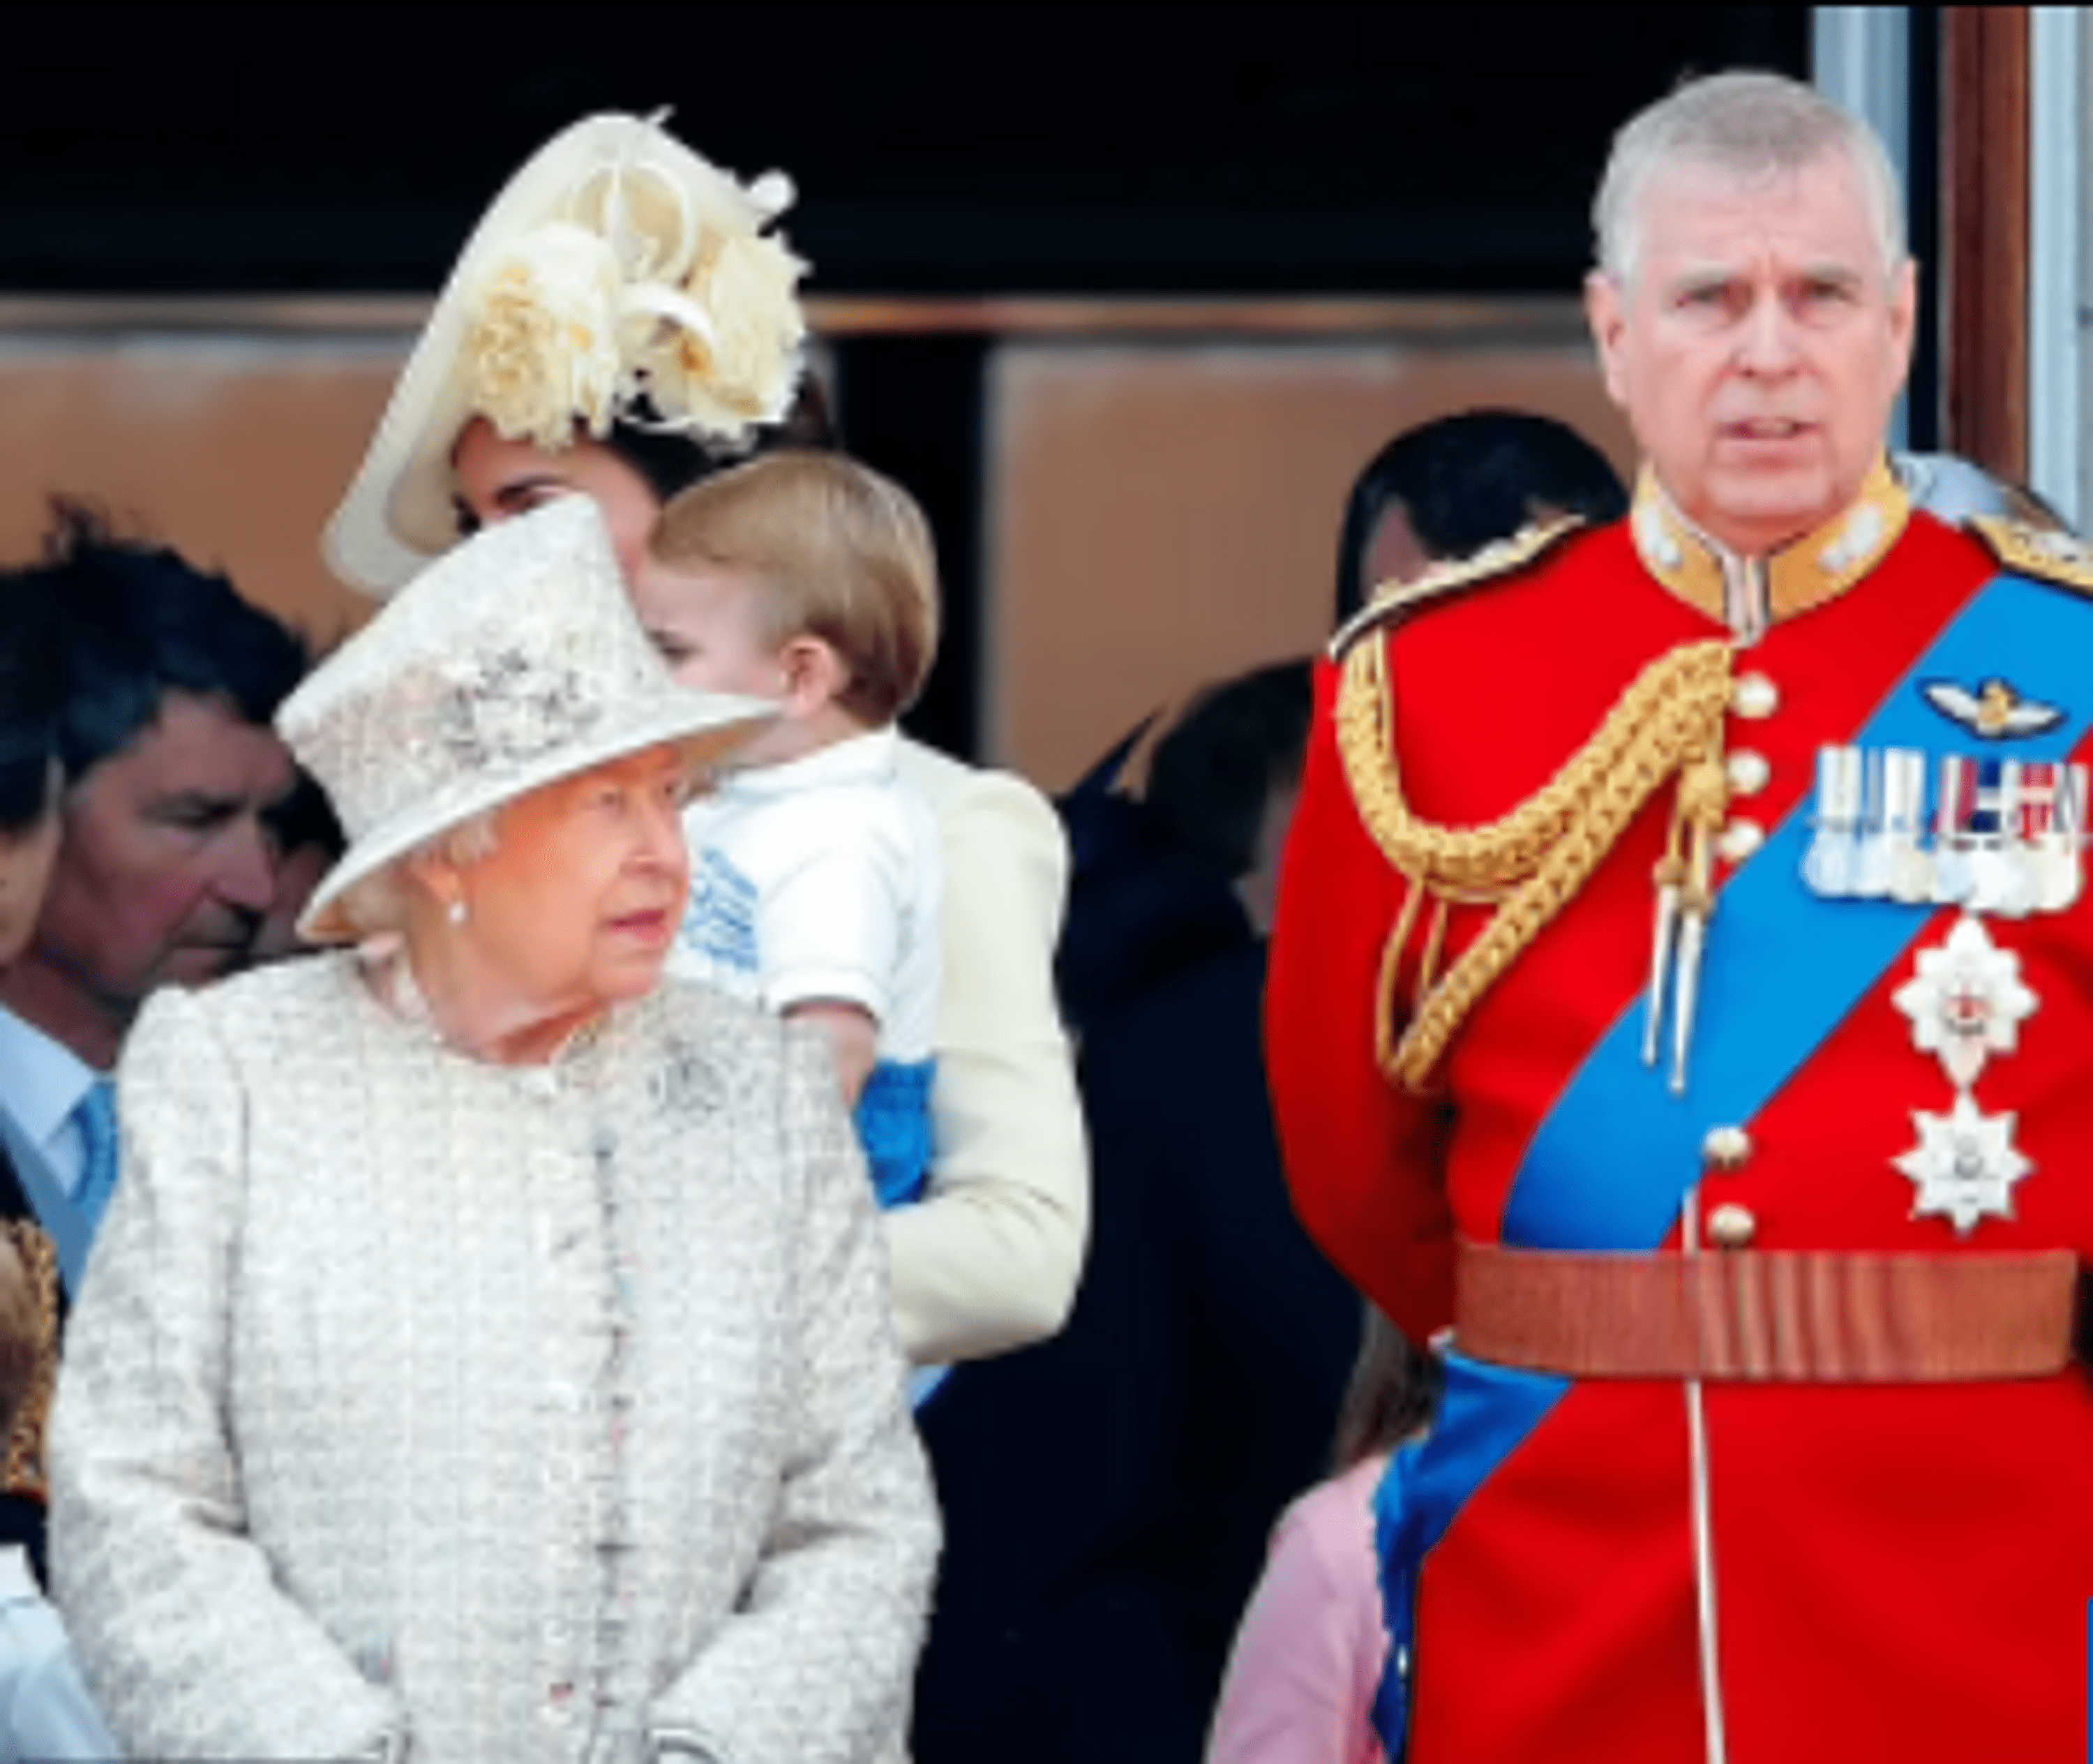 ”the-scandalous-prince-andrew-will-appear-at-the-presentation-of-the-highest-knightly-order-of-great-britain”